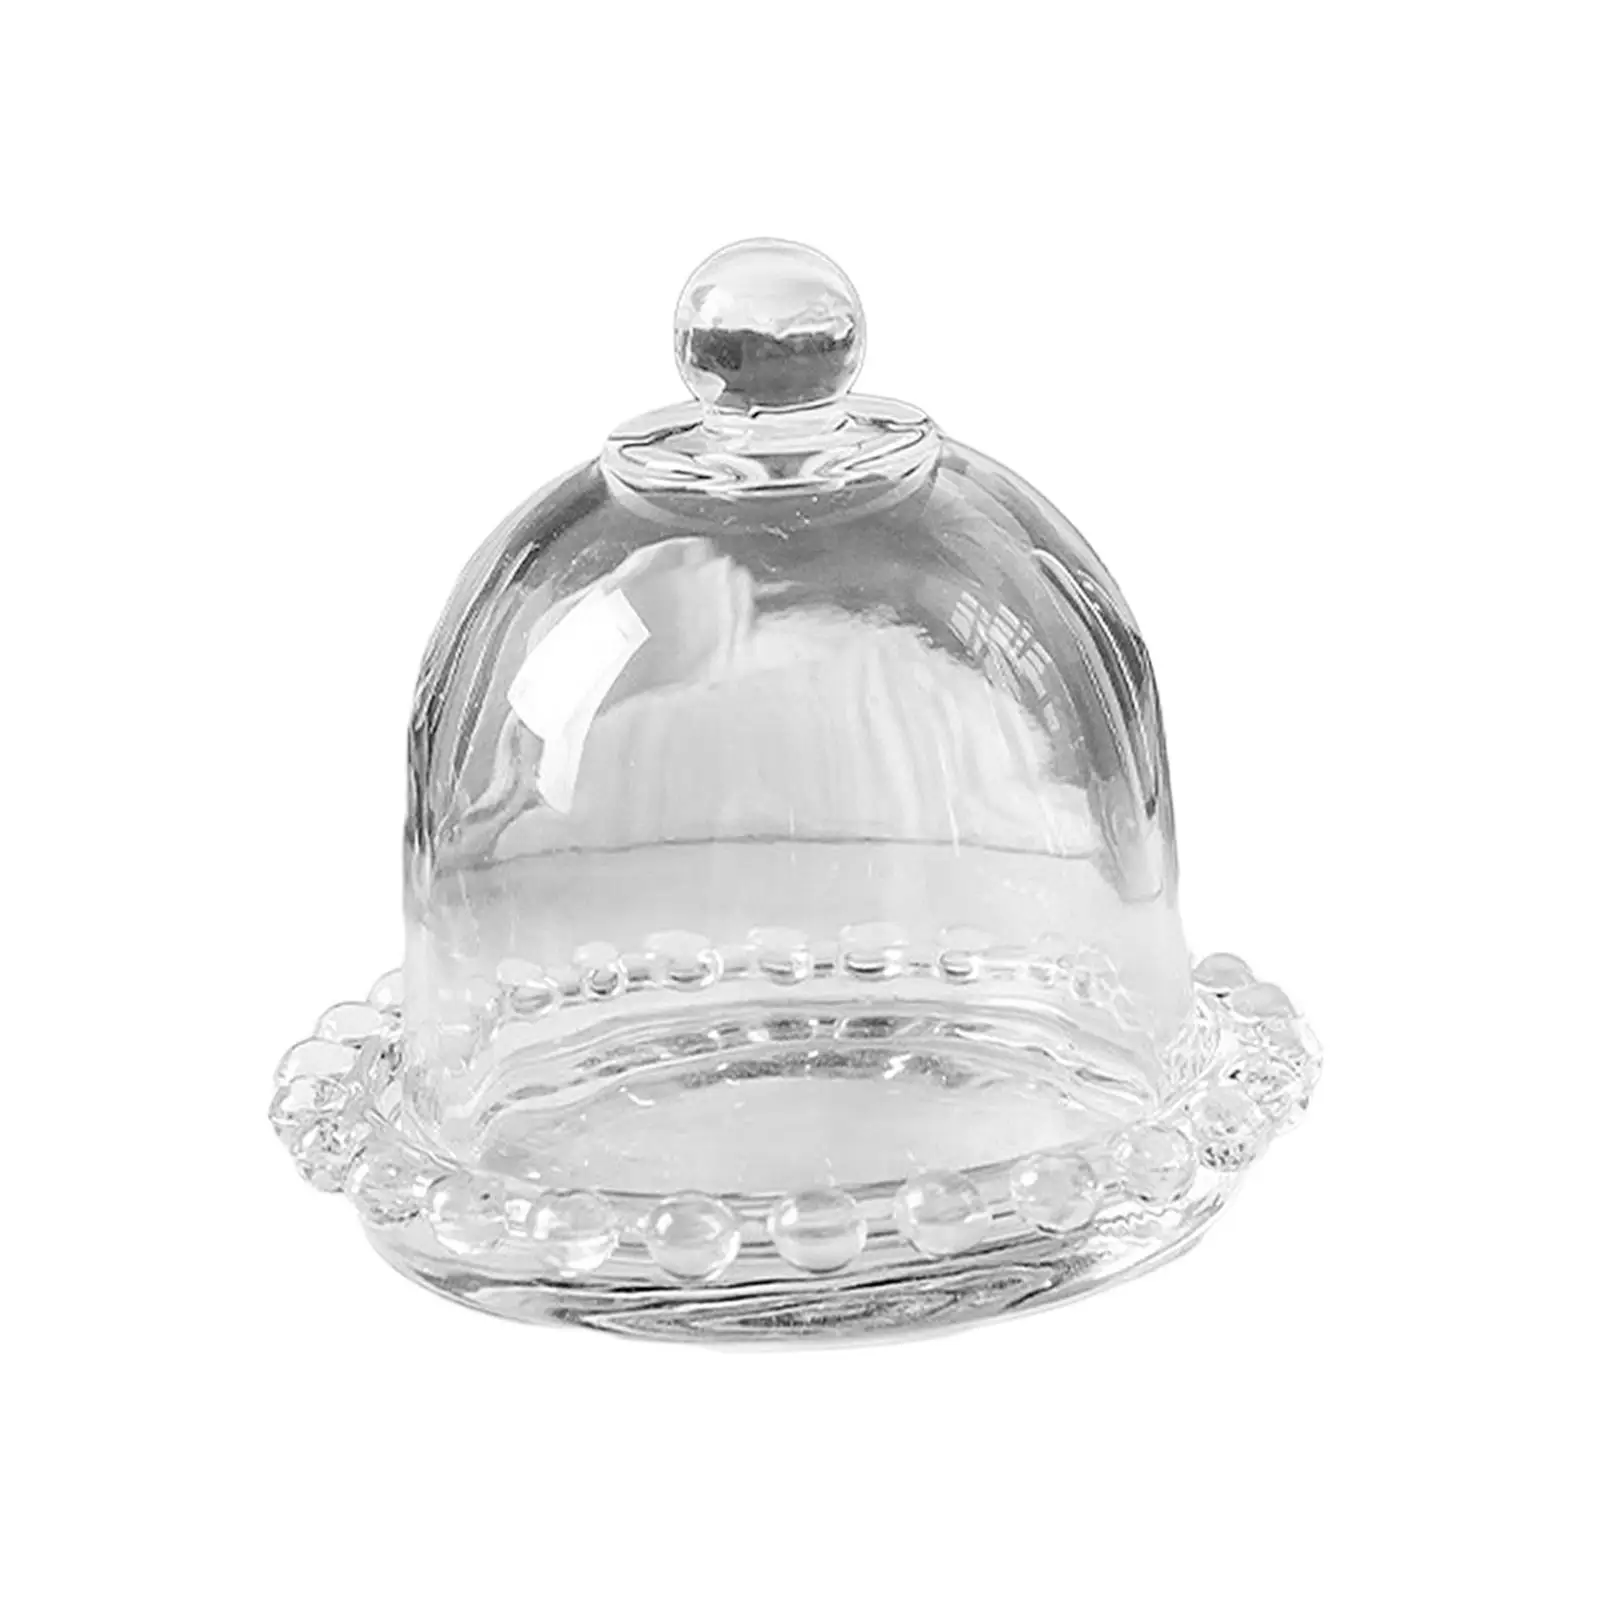 Cake Plate with Cover Glass Dessert Dome with Base Appetizer Plate for Birthday Dessert Shops Home Restaurant Festive Party